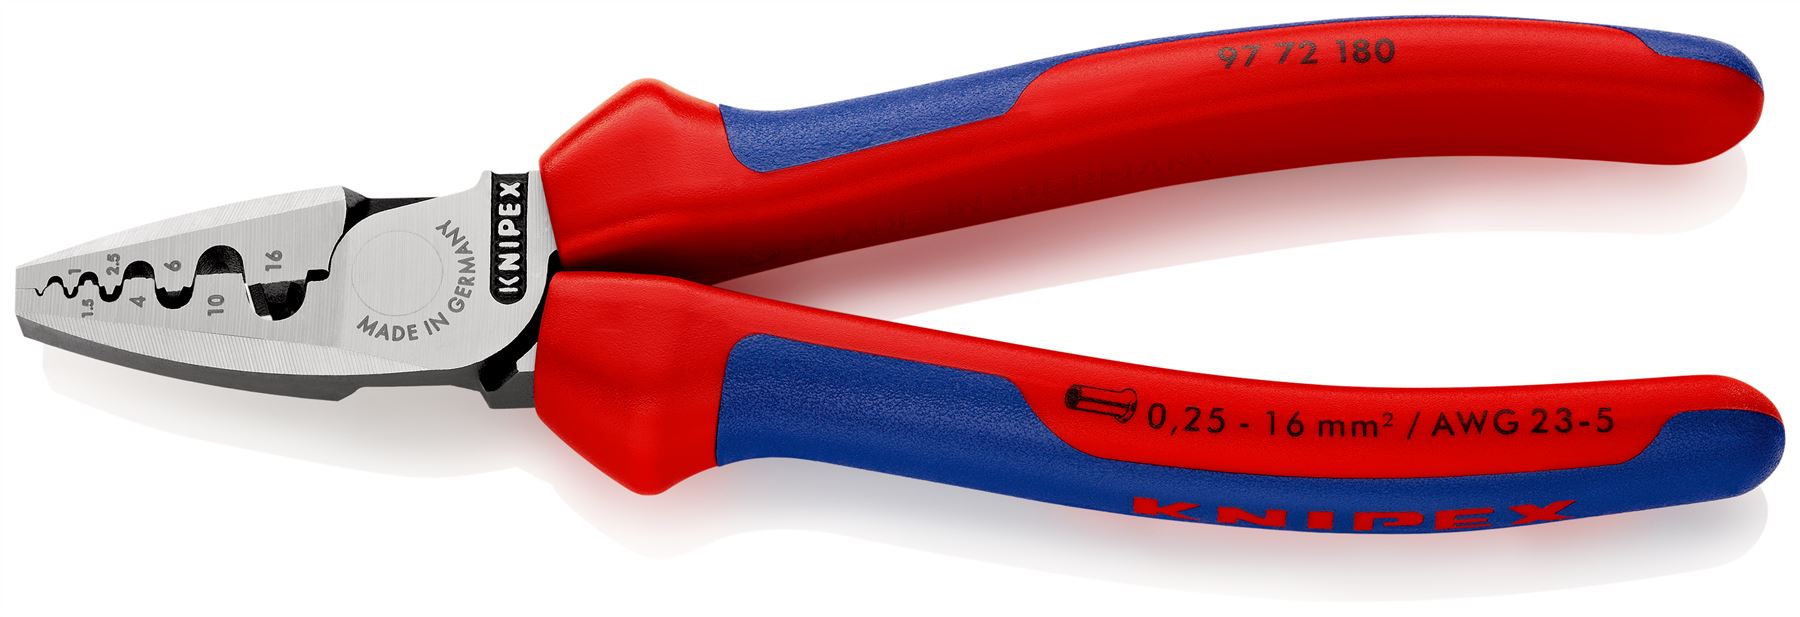 KNIPEX Crimping Pliers for Wire Ferrules 180mm 0.25-16mm² 180mm Multi Component Grips 97 72 180